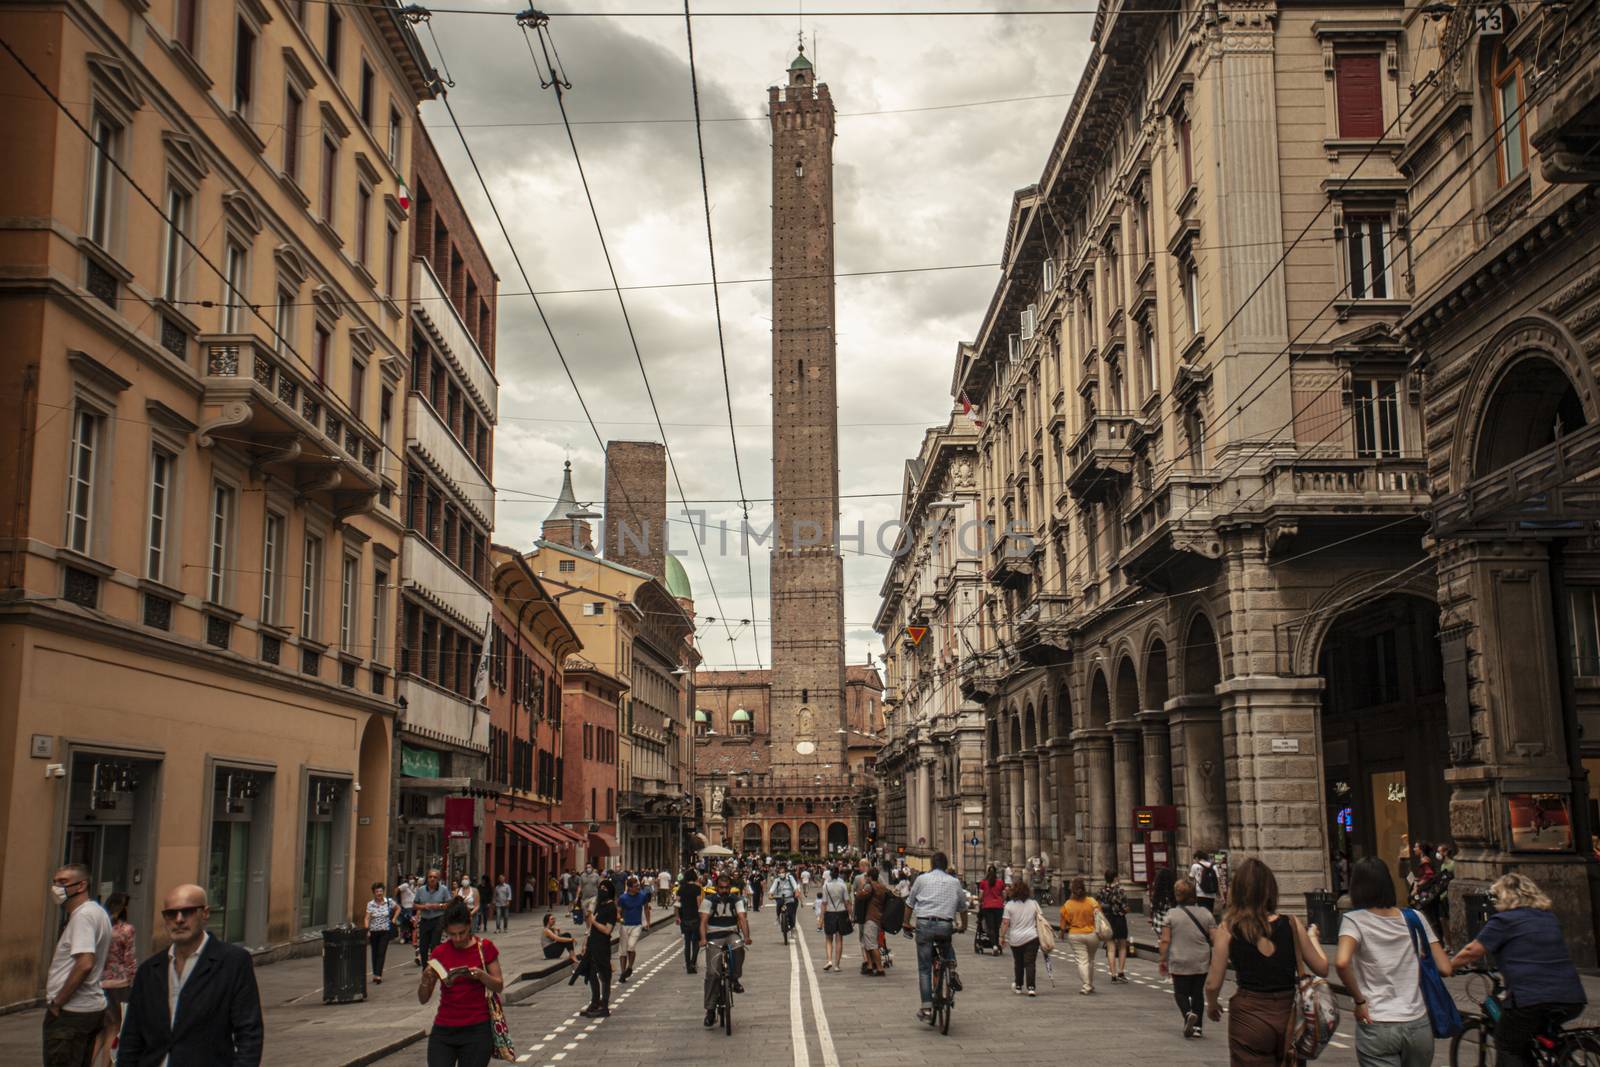 BOLOGNA, ITALY 17 JUNE 2020: Via Rizzoli in Bologna, Italy with his historical Building and the Asinelli Tower at the end